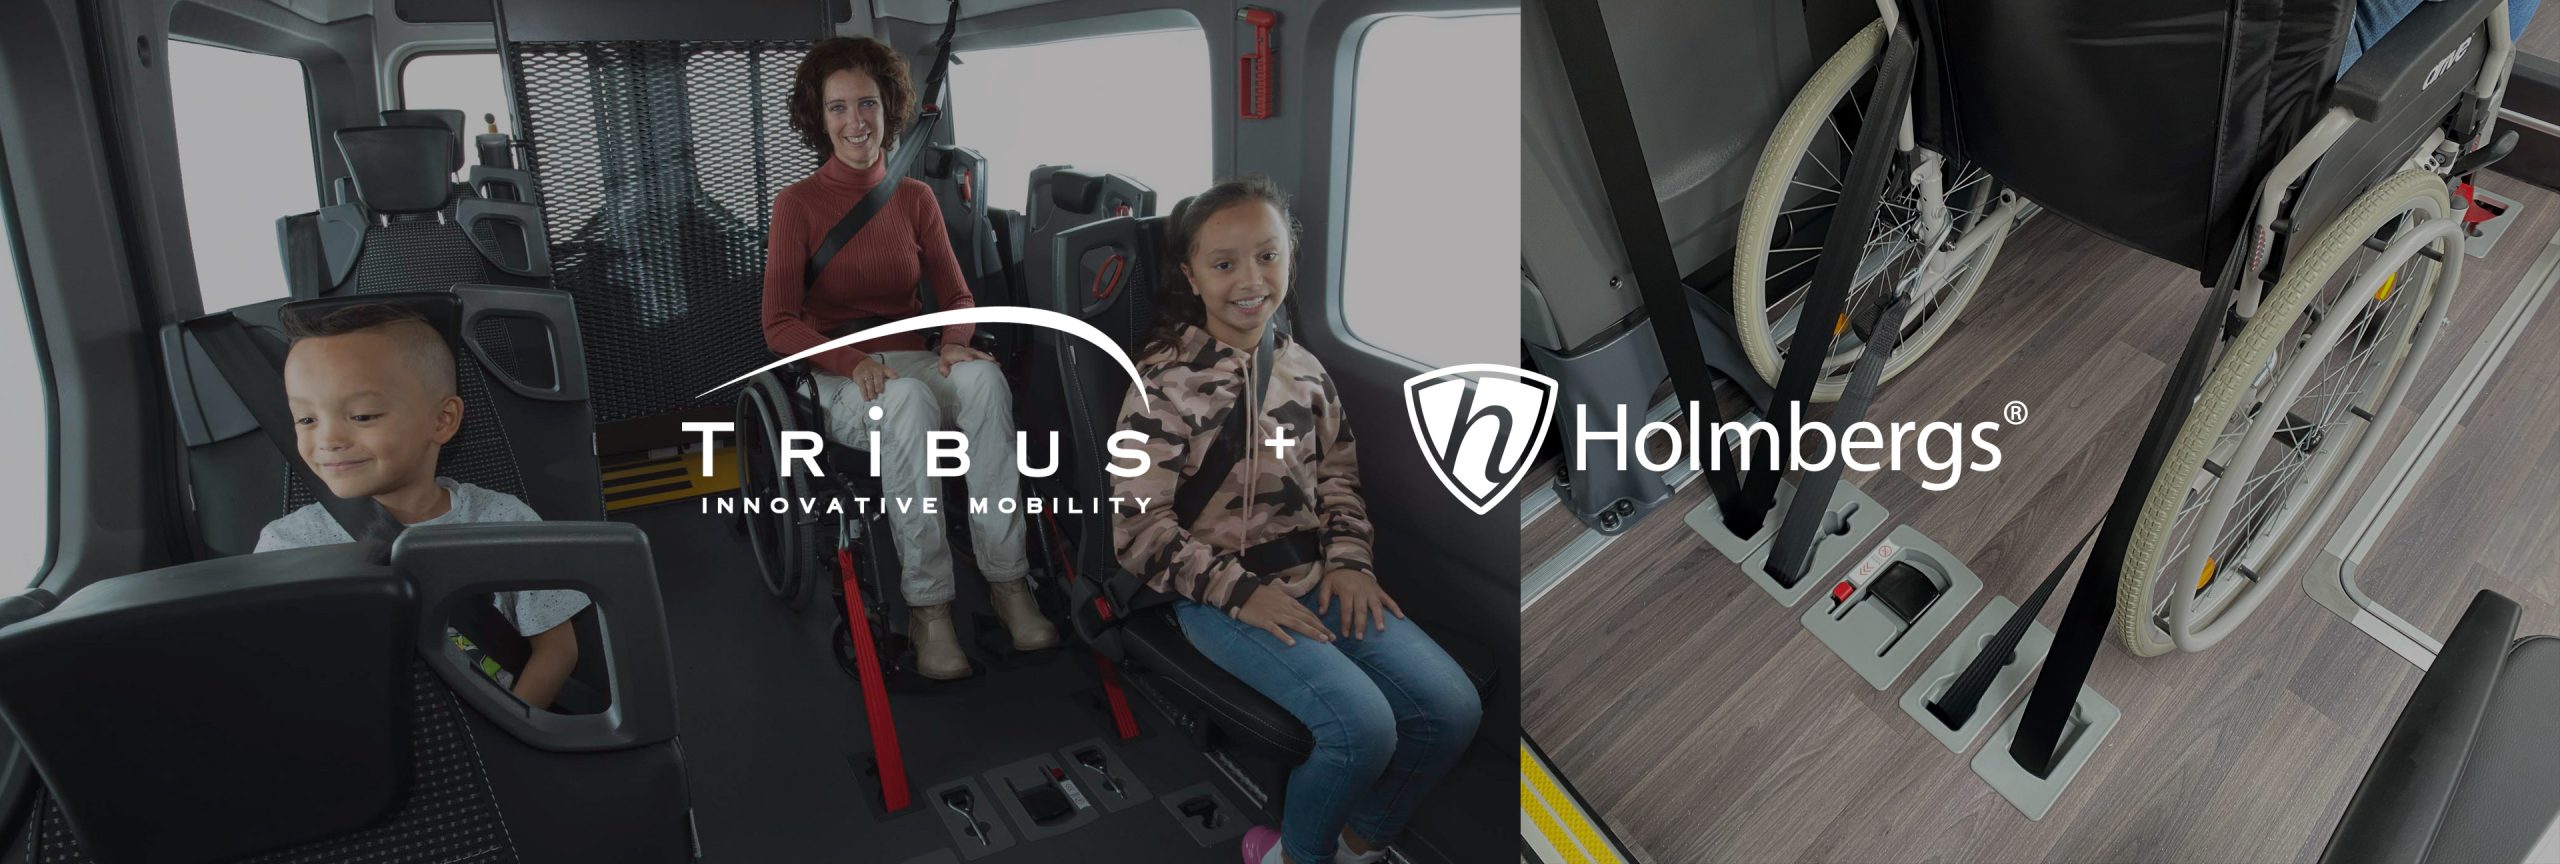 Tribus and Holmbergs Safety Systems